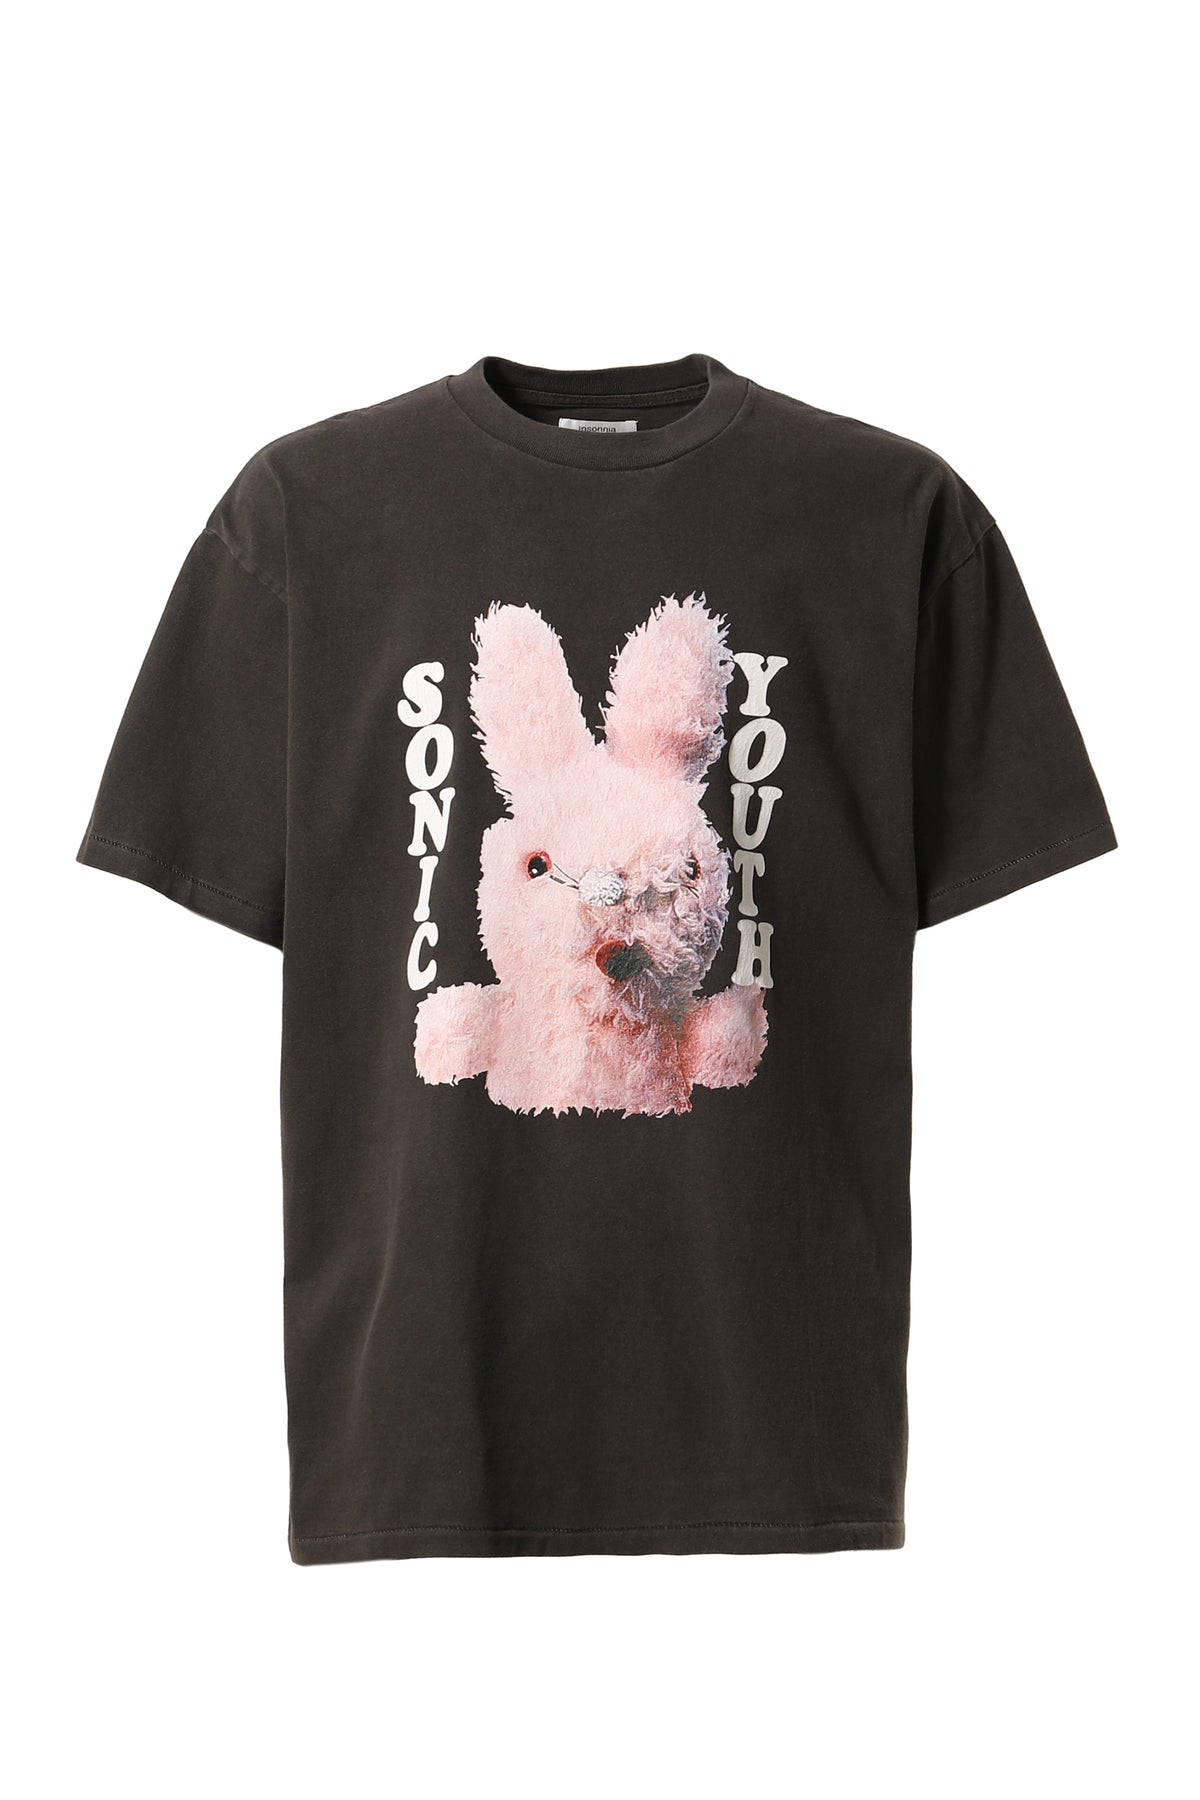 SONIC YOUTH MK BUNNY TEE / BLK